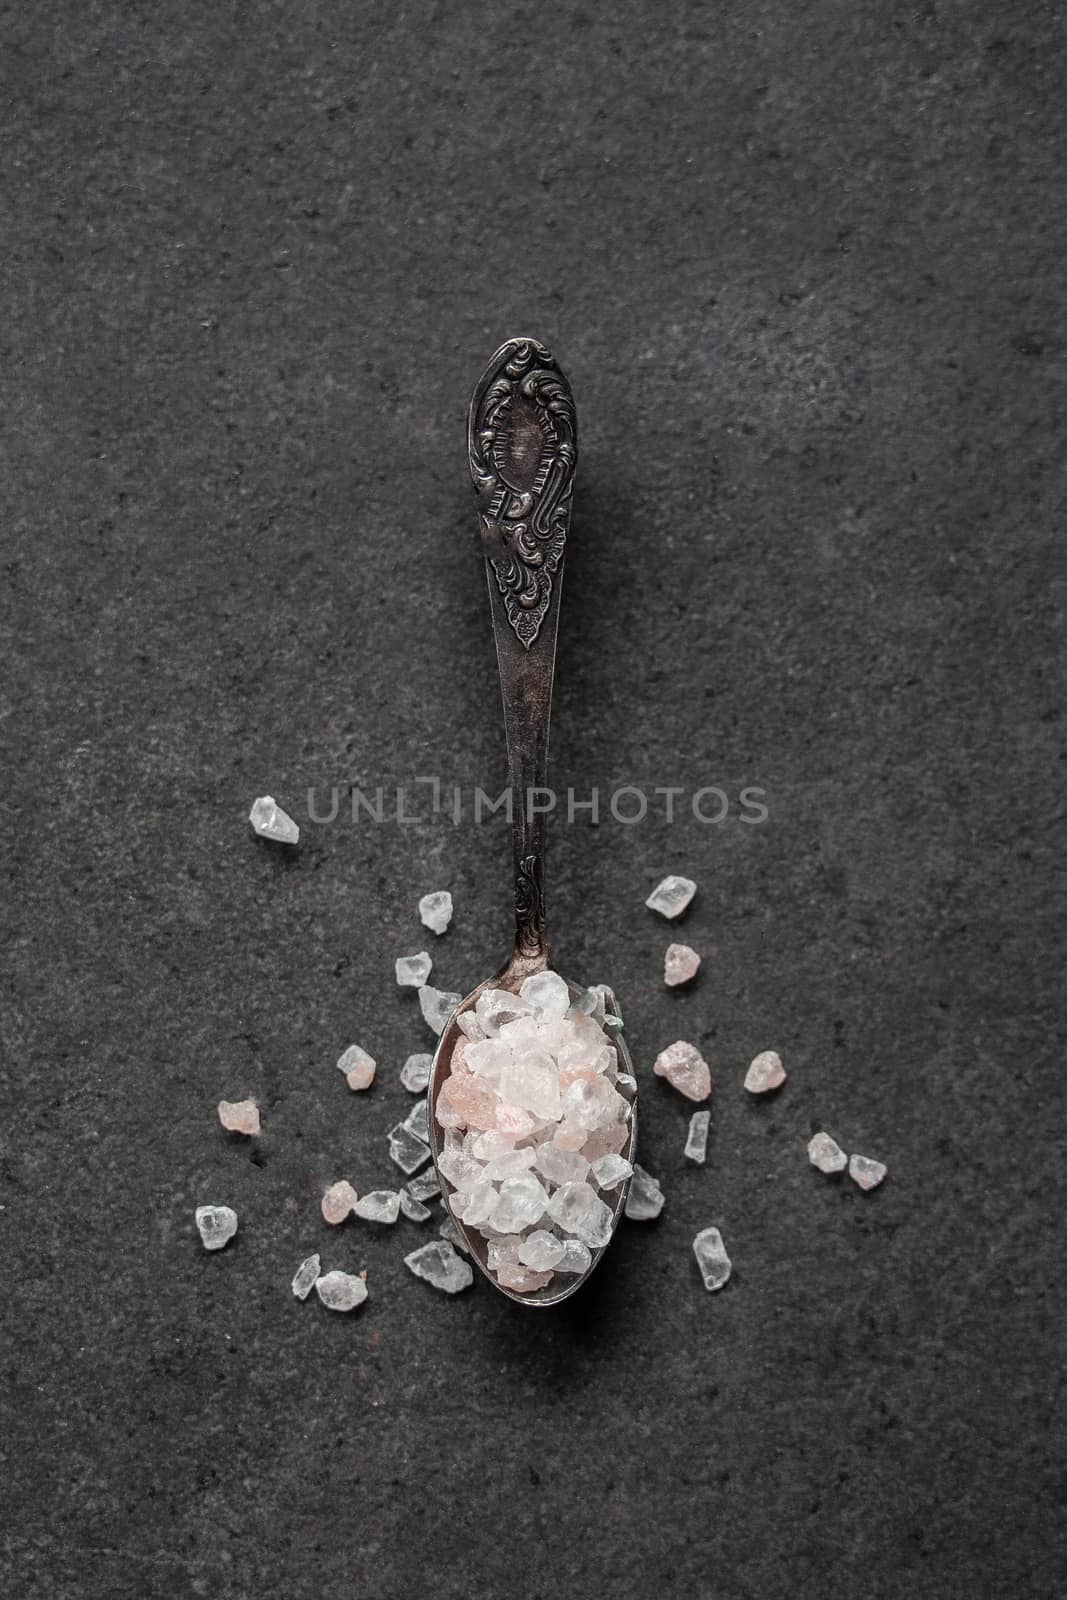 Spoon with Himalayan salt on a black table by Opikanets